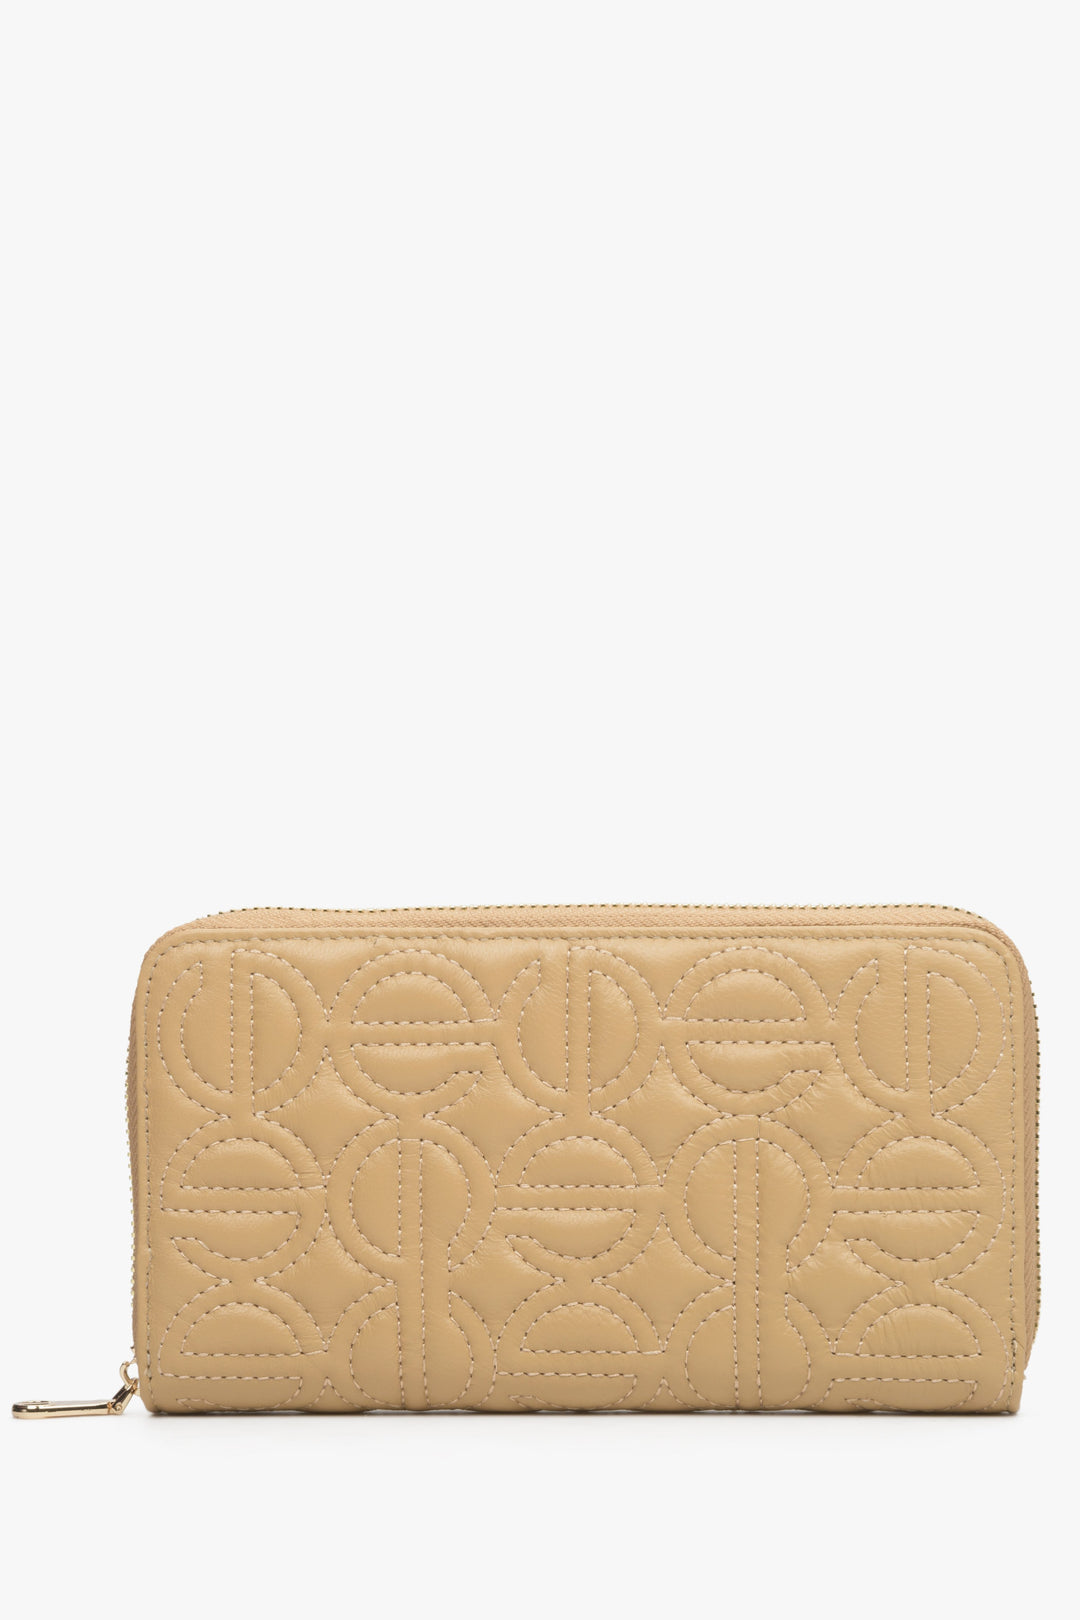 Beige leather women's continental wallet with embossed Estro brand logo.